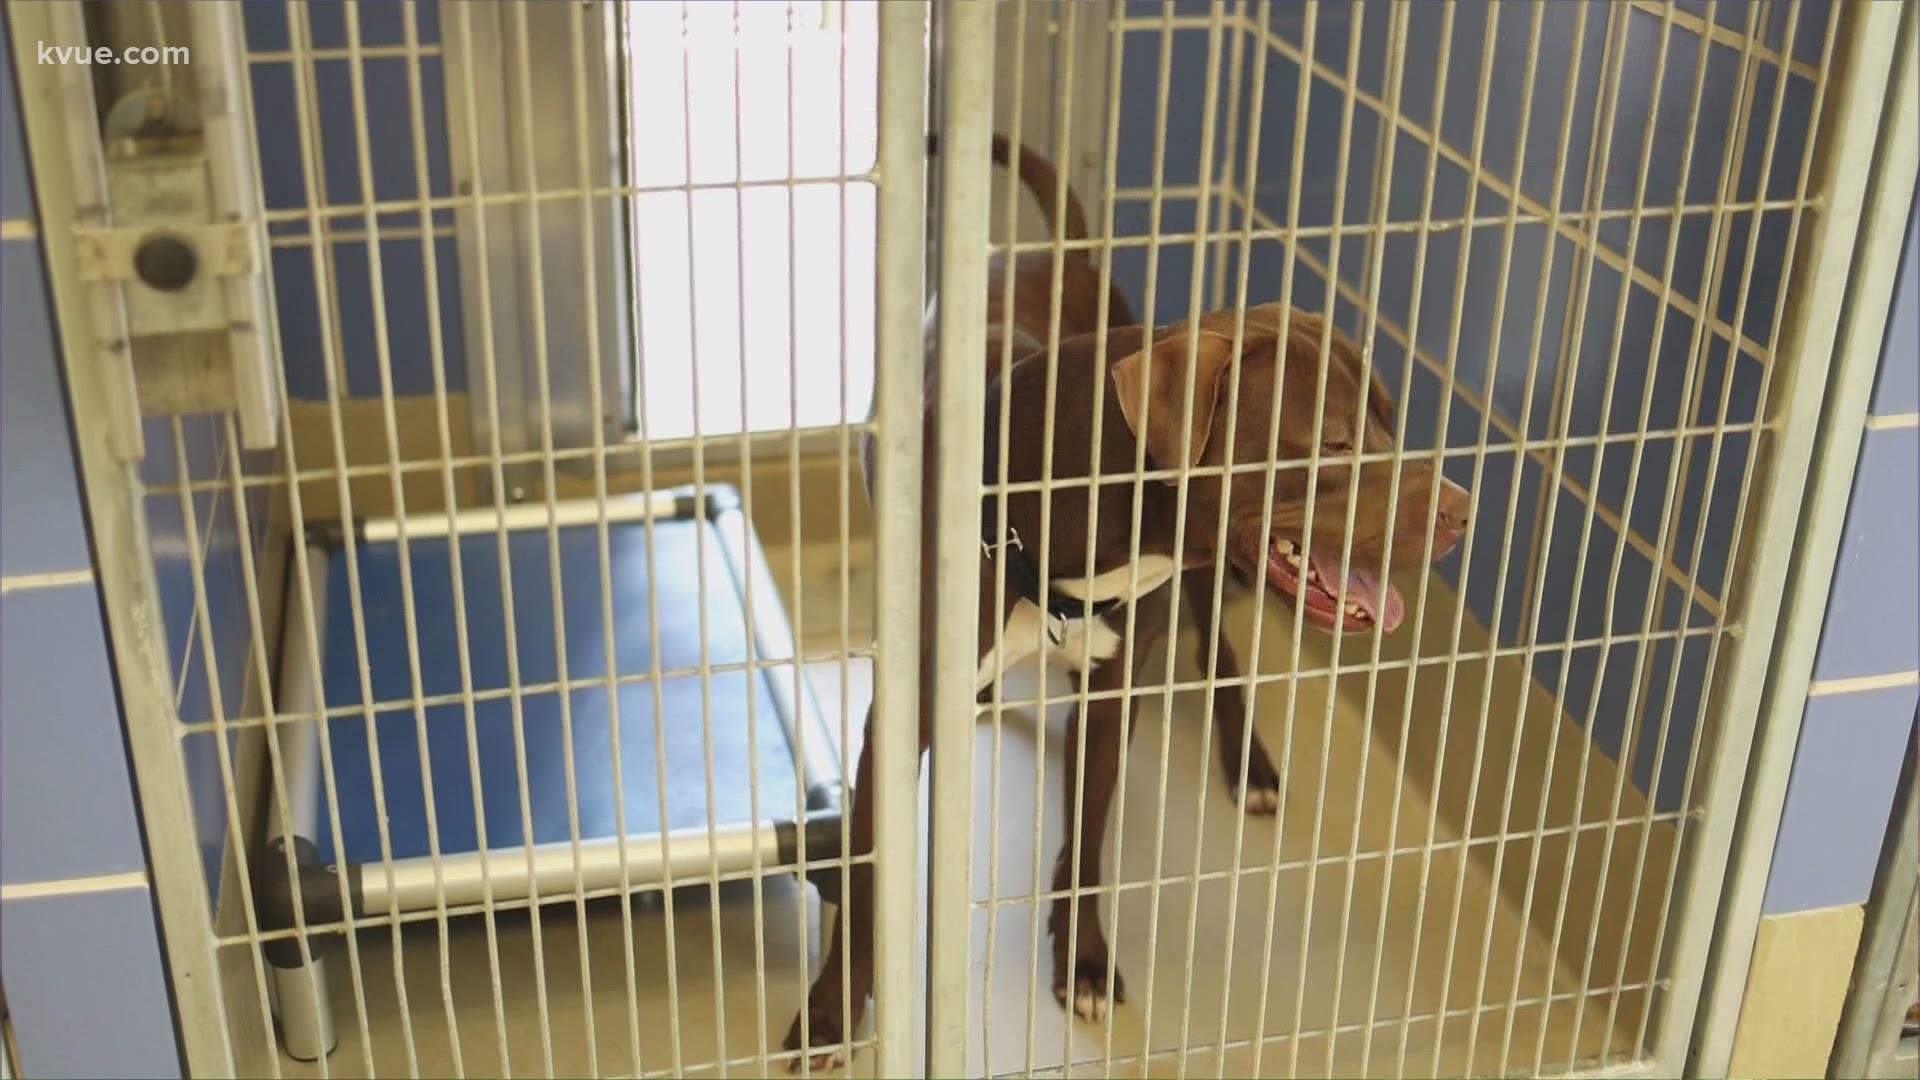 Many "pandemic pups" are being returned to shelters in record numbers.